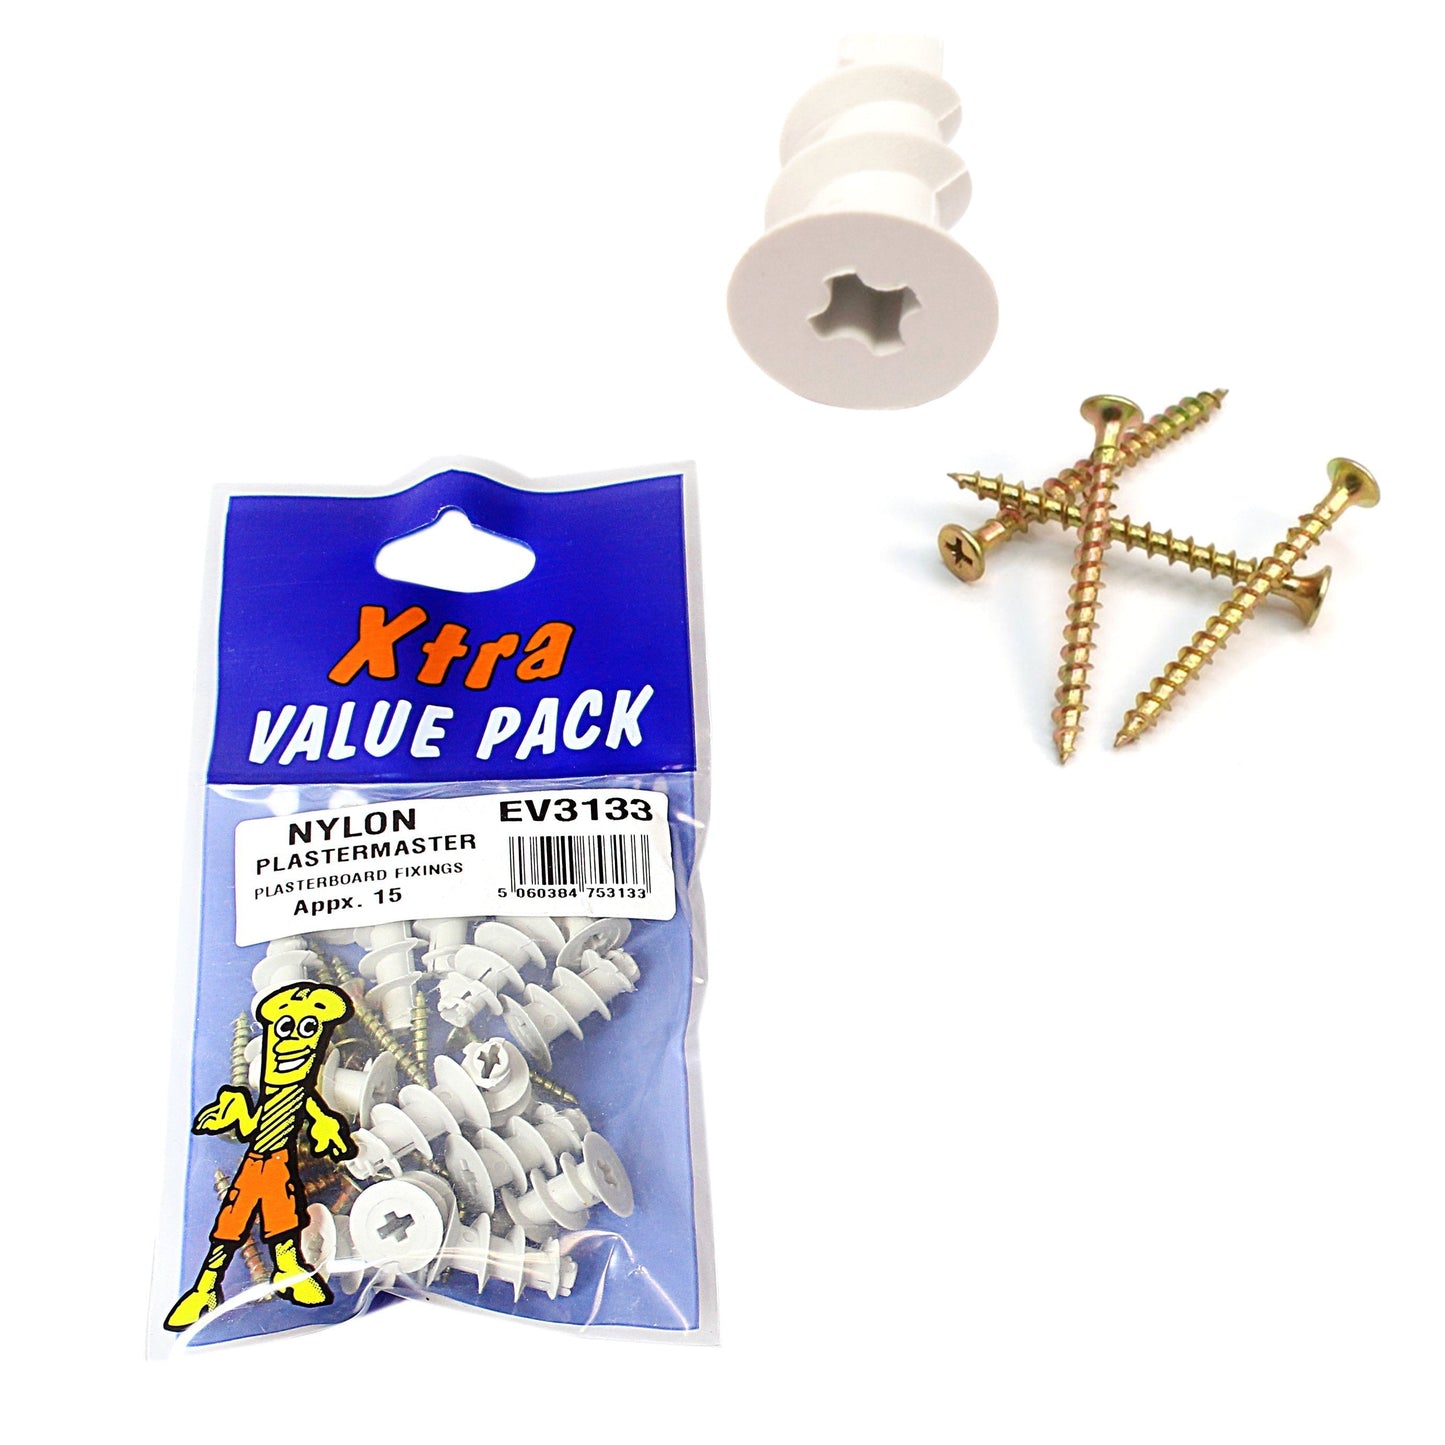 Xtra Value Pack Nylon Plaster Master Plasterboard Fixings Pack of 15 EV3133 (Large Letter Rate)